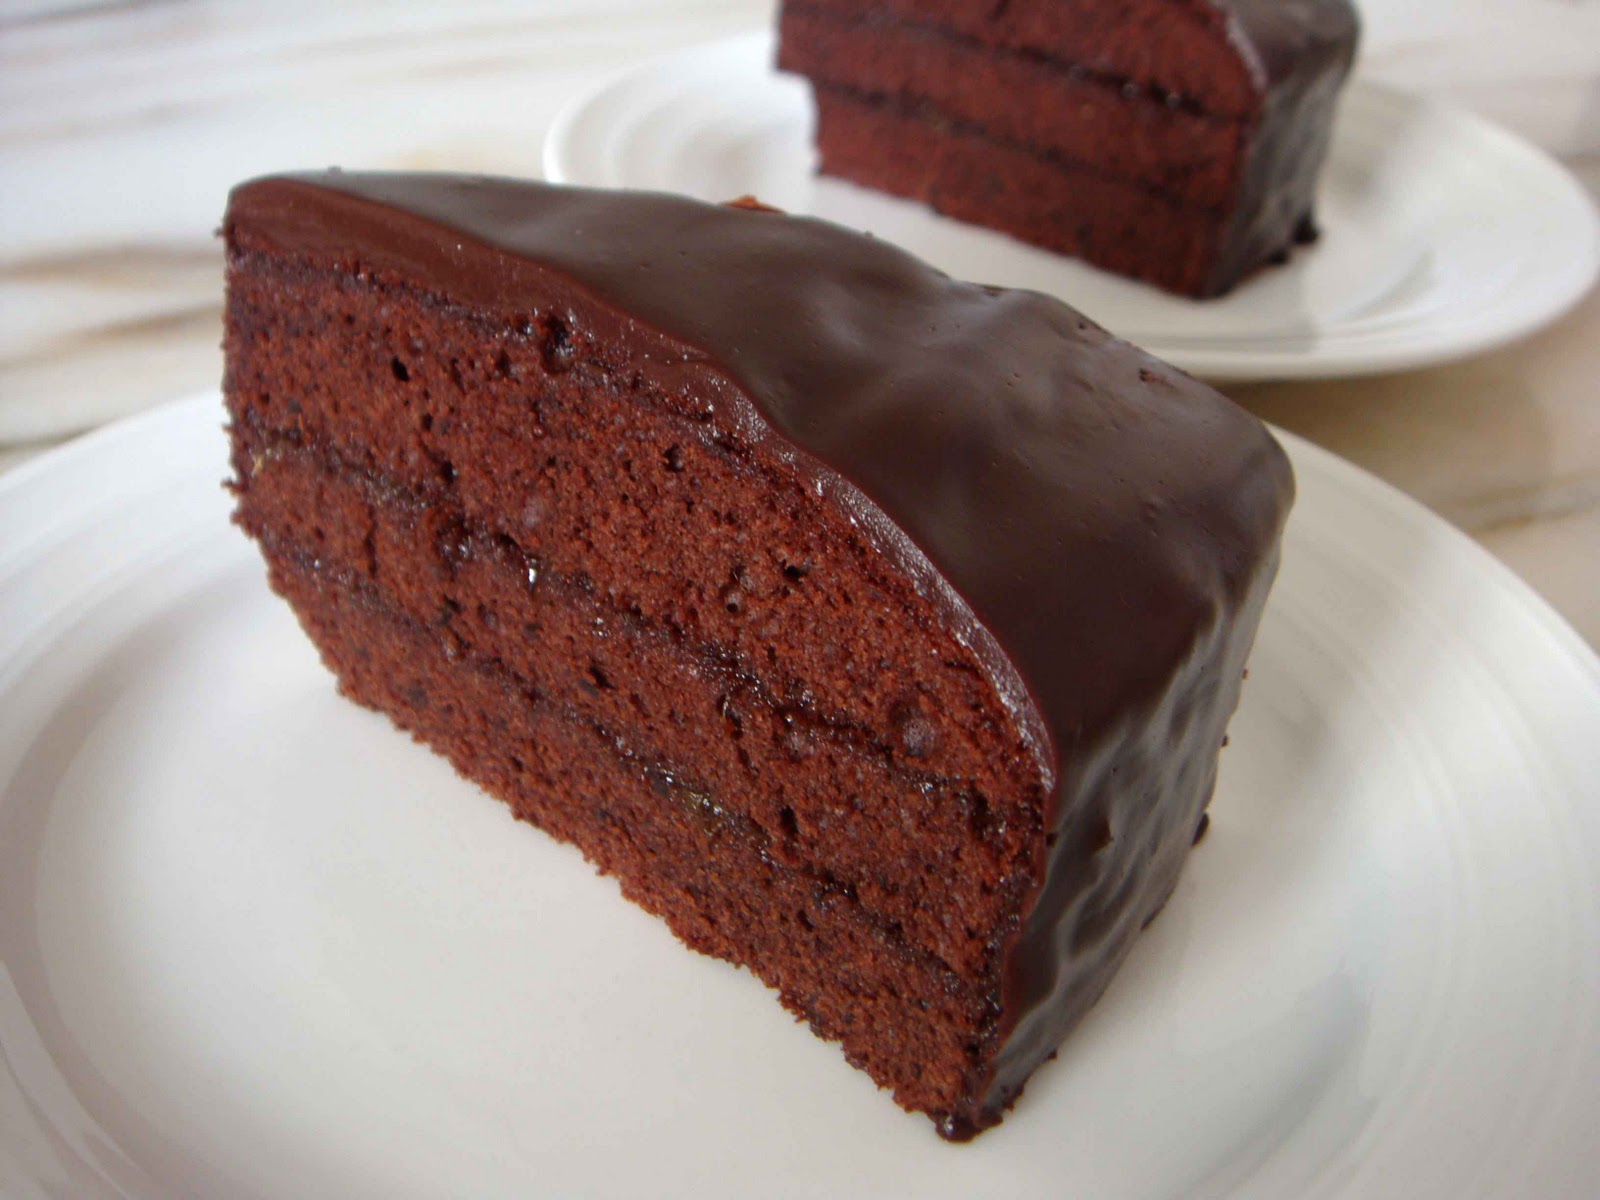 chocolate layer cake recipe From experience, I like chocolate cake recipes that use a decent 